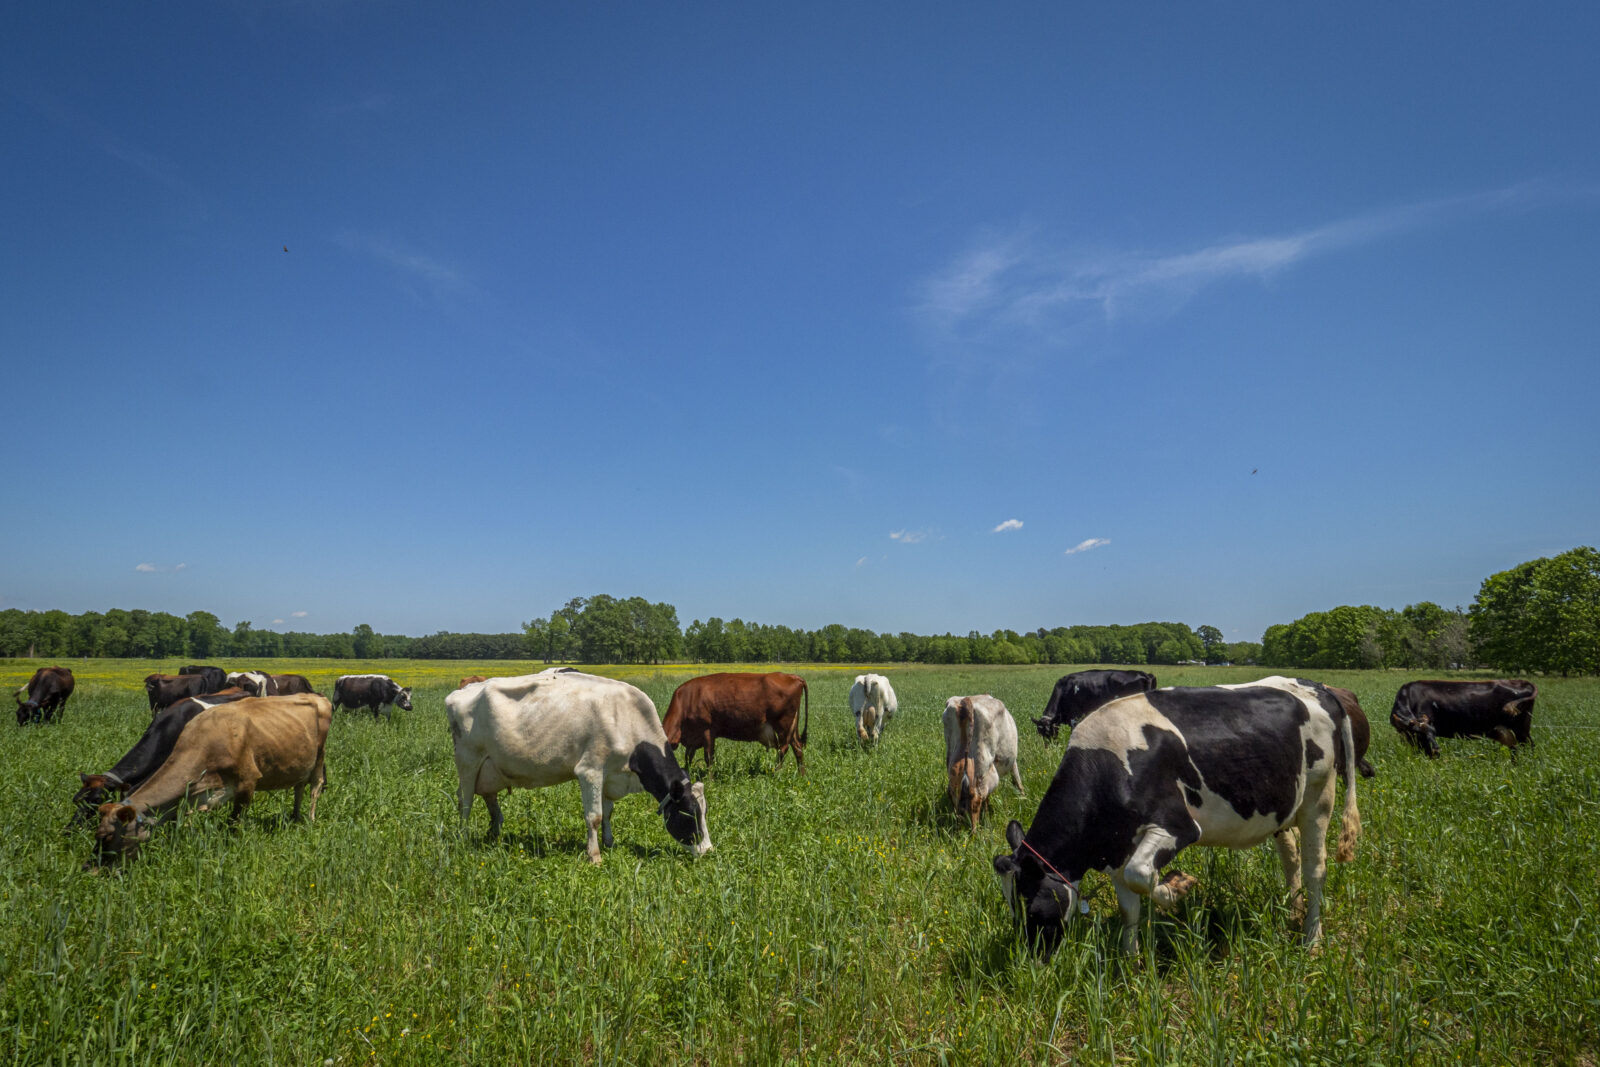 Several cows and bulls graze a green field on a sunny day.